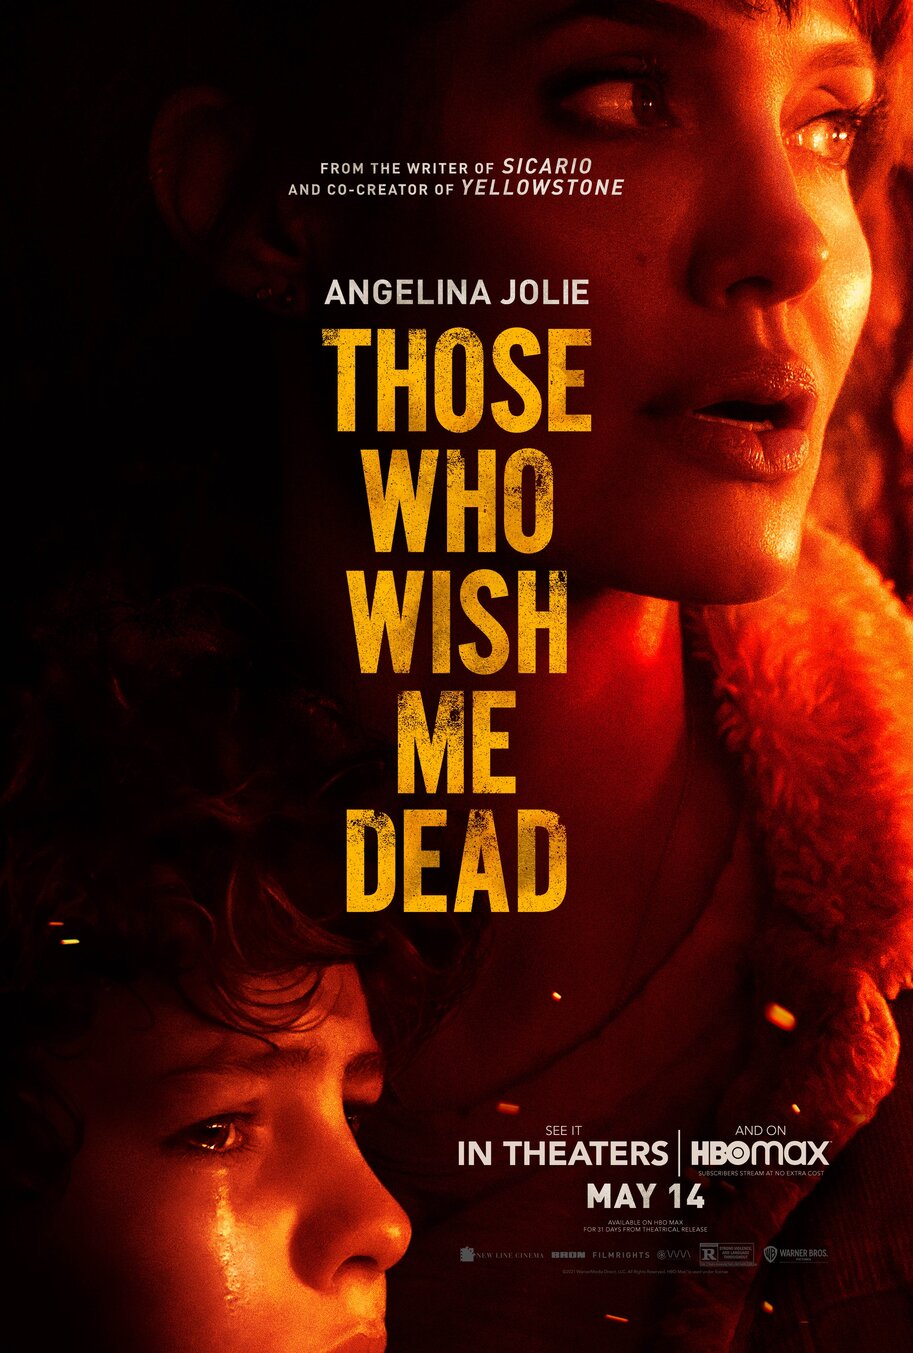 They Want Me Dead Angelina Jolie Poster